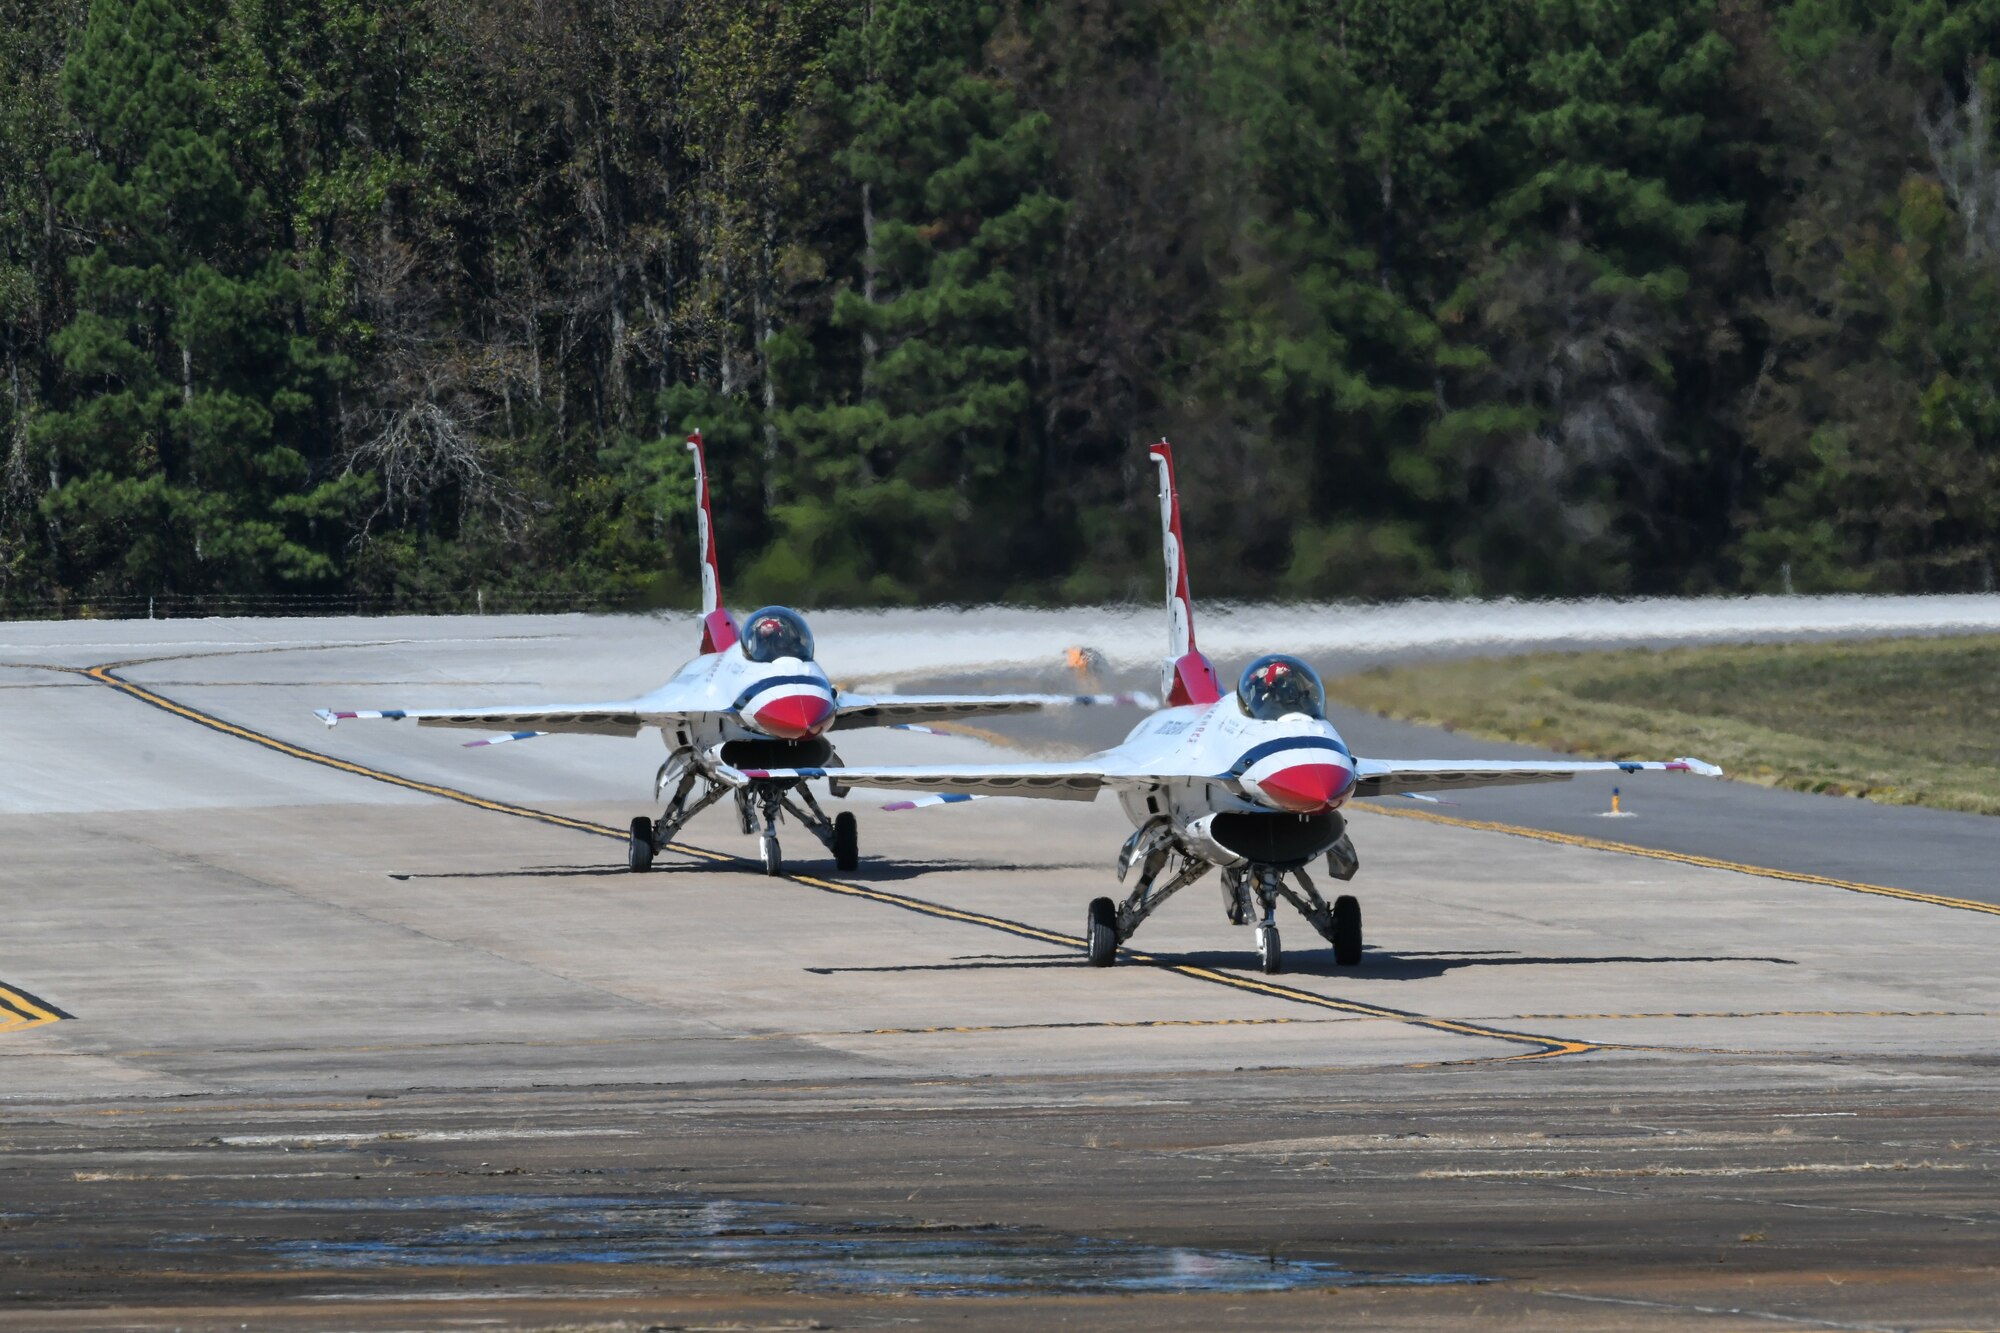 Tow F-16's on LRAFB airfield.